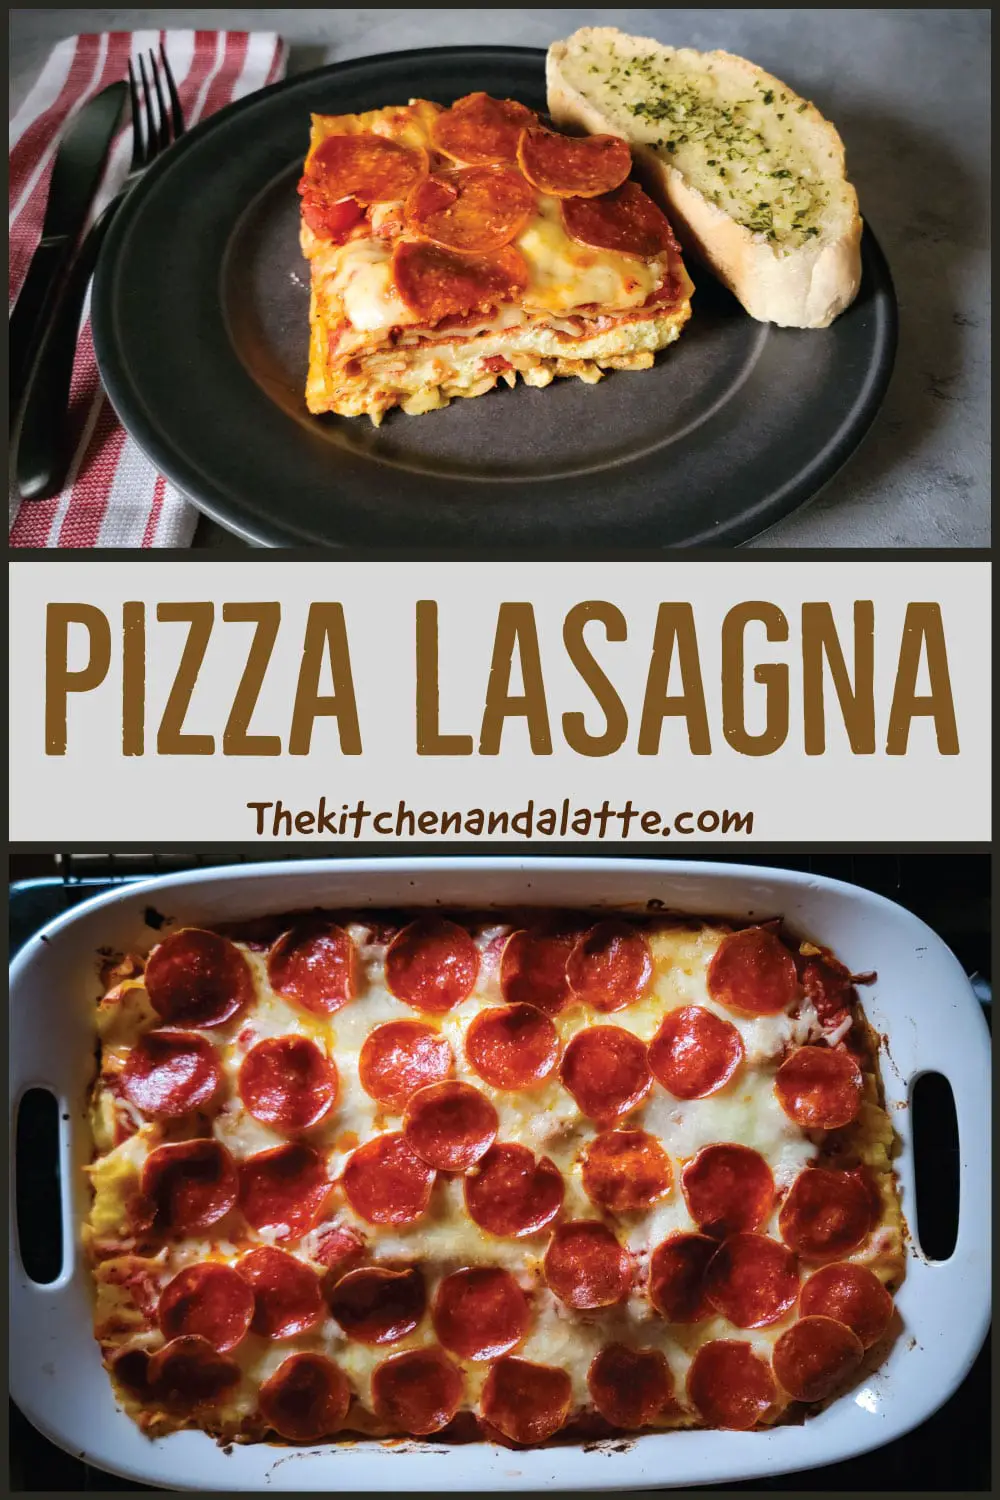 Pizza lasagna Pinterest graphic. 2 pictures 1 is lasagna in a casserole dish out of the oven resting before serving. 1 is a piece of pizza lasagna on a dinner plate with a slice of garlic bread.